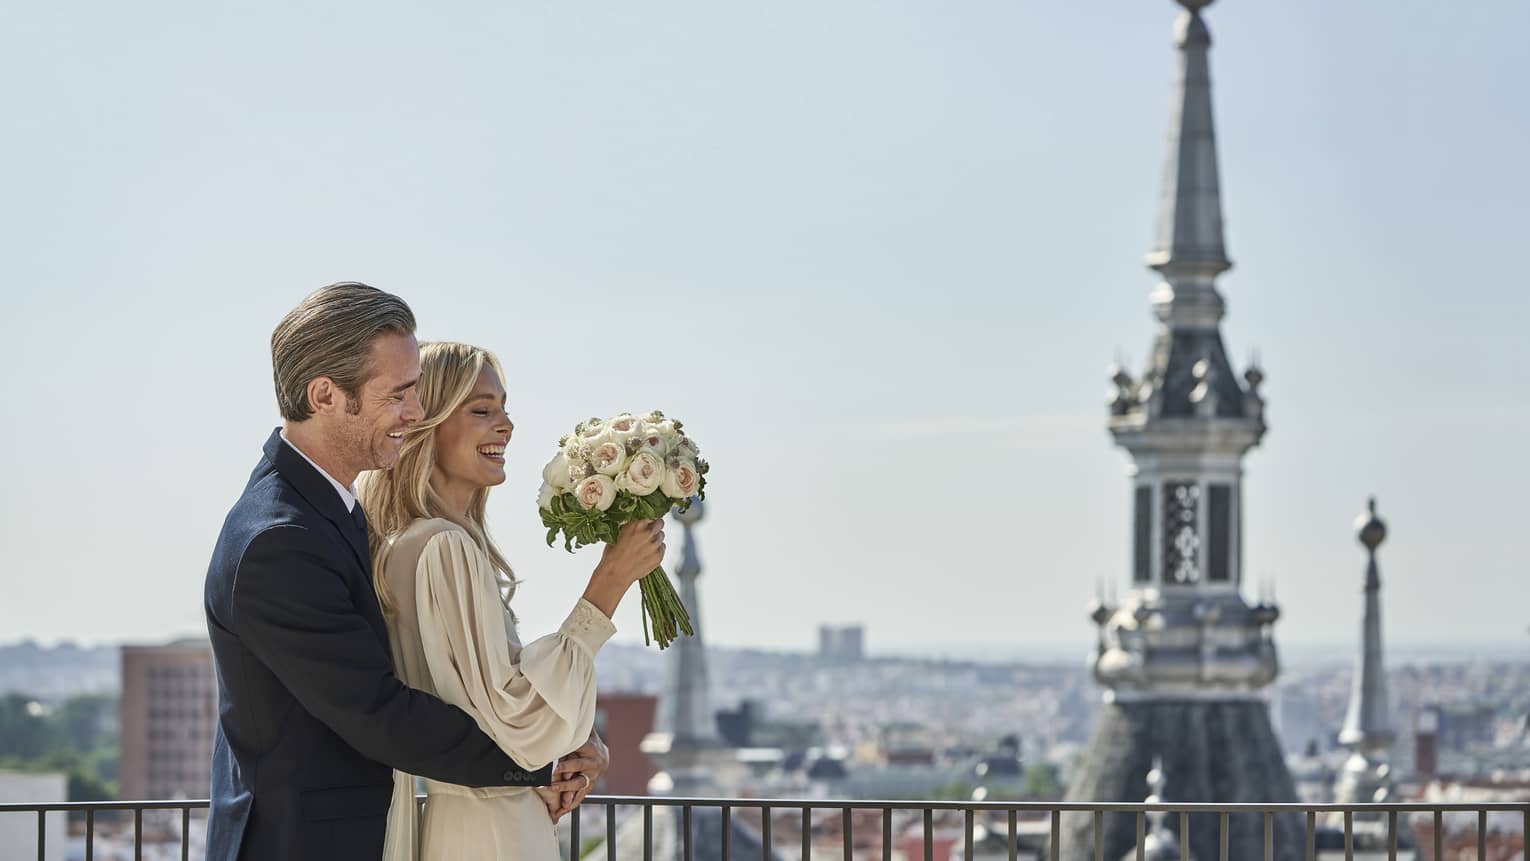 A couple embrace on a veranda overlooking several steeples in Madrid.